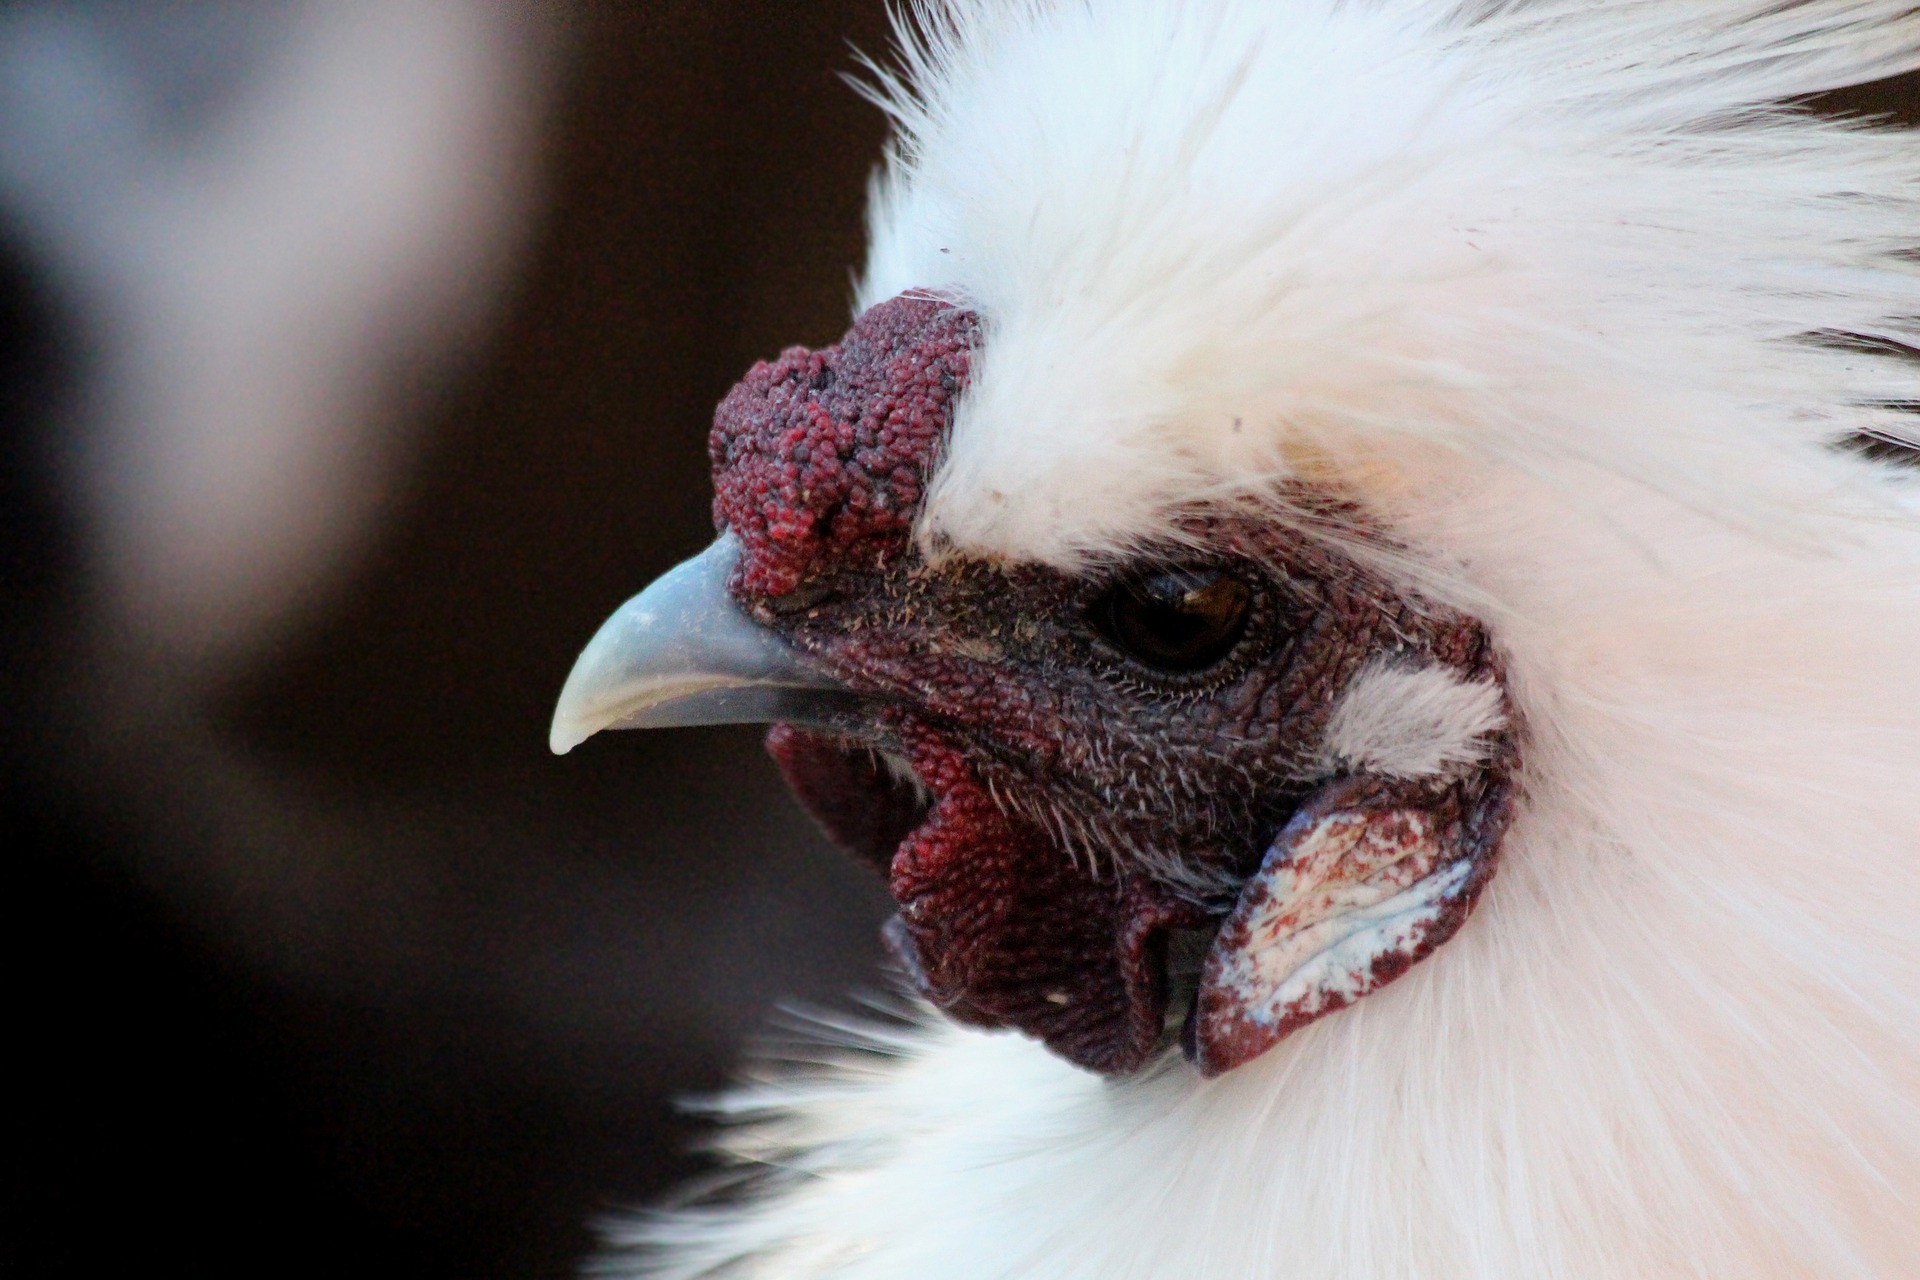 white silkie's face close-up